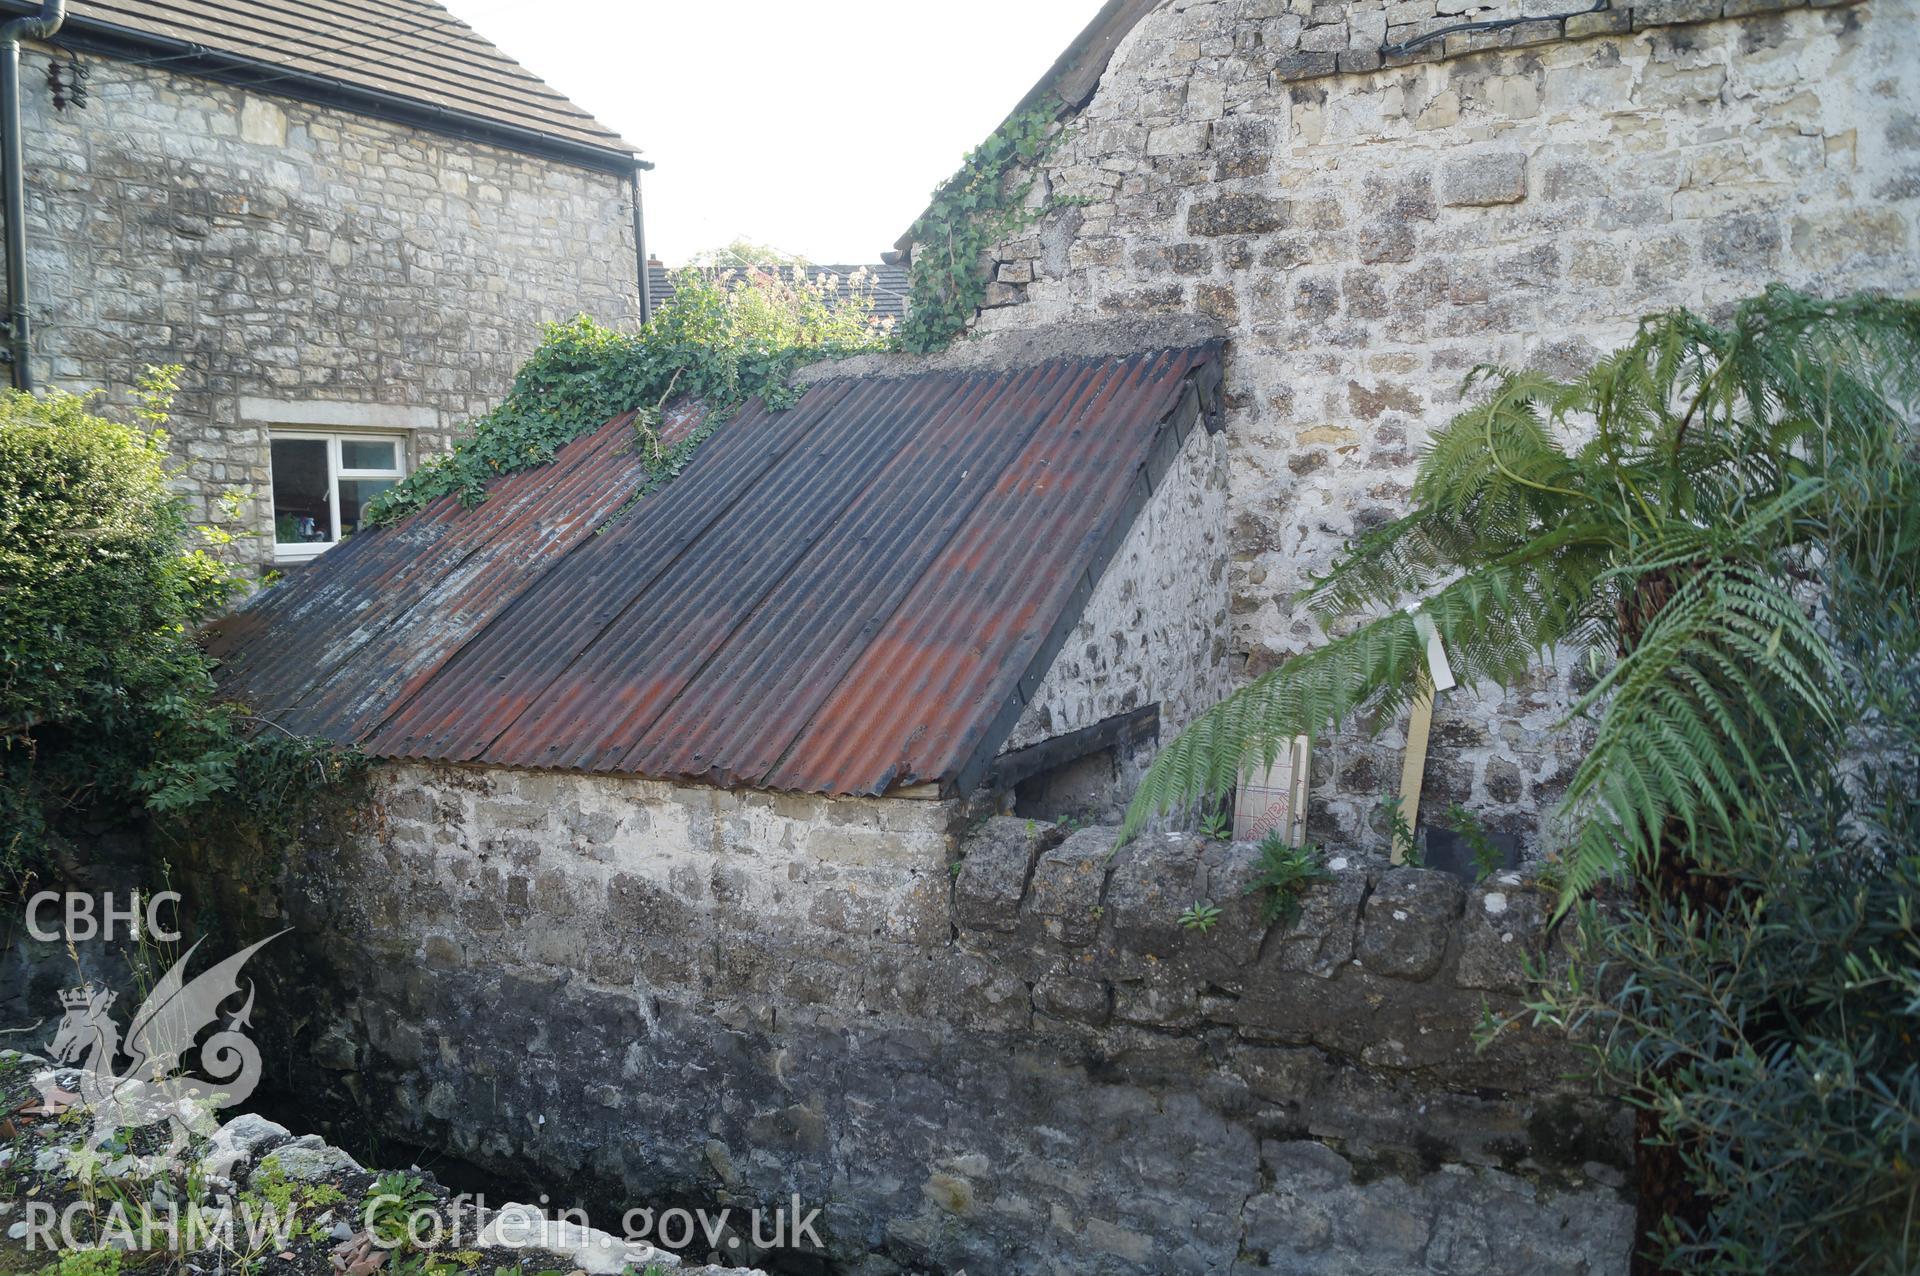 View 'looking south southwest at the former pigsty and its yard wall with the eastern gable wall of barn' at Rowley Court, Llantwit Major. Photograph & description by Jenny Hall & Paul Sambrook of Trysor, 7th September 2016.